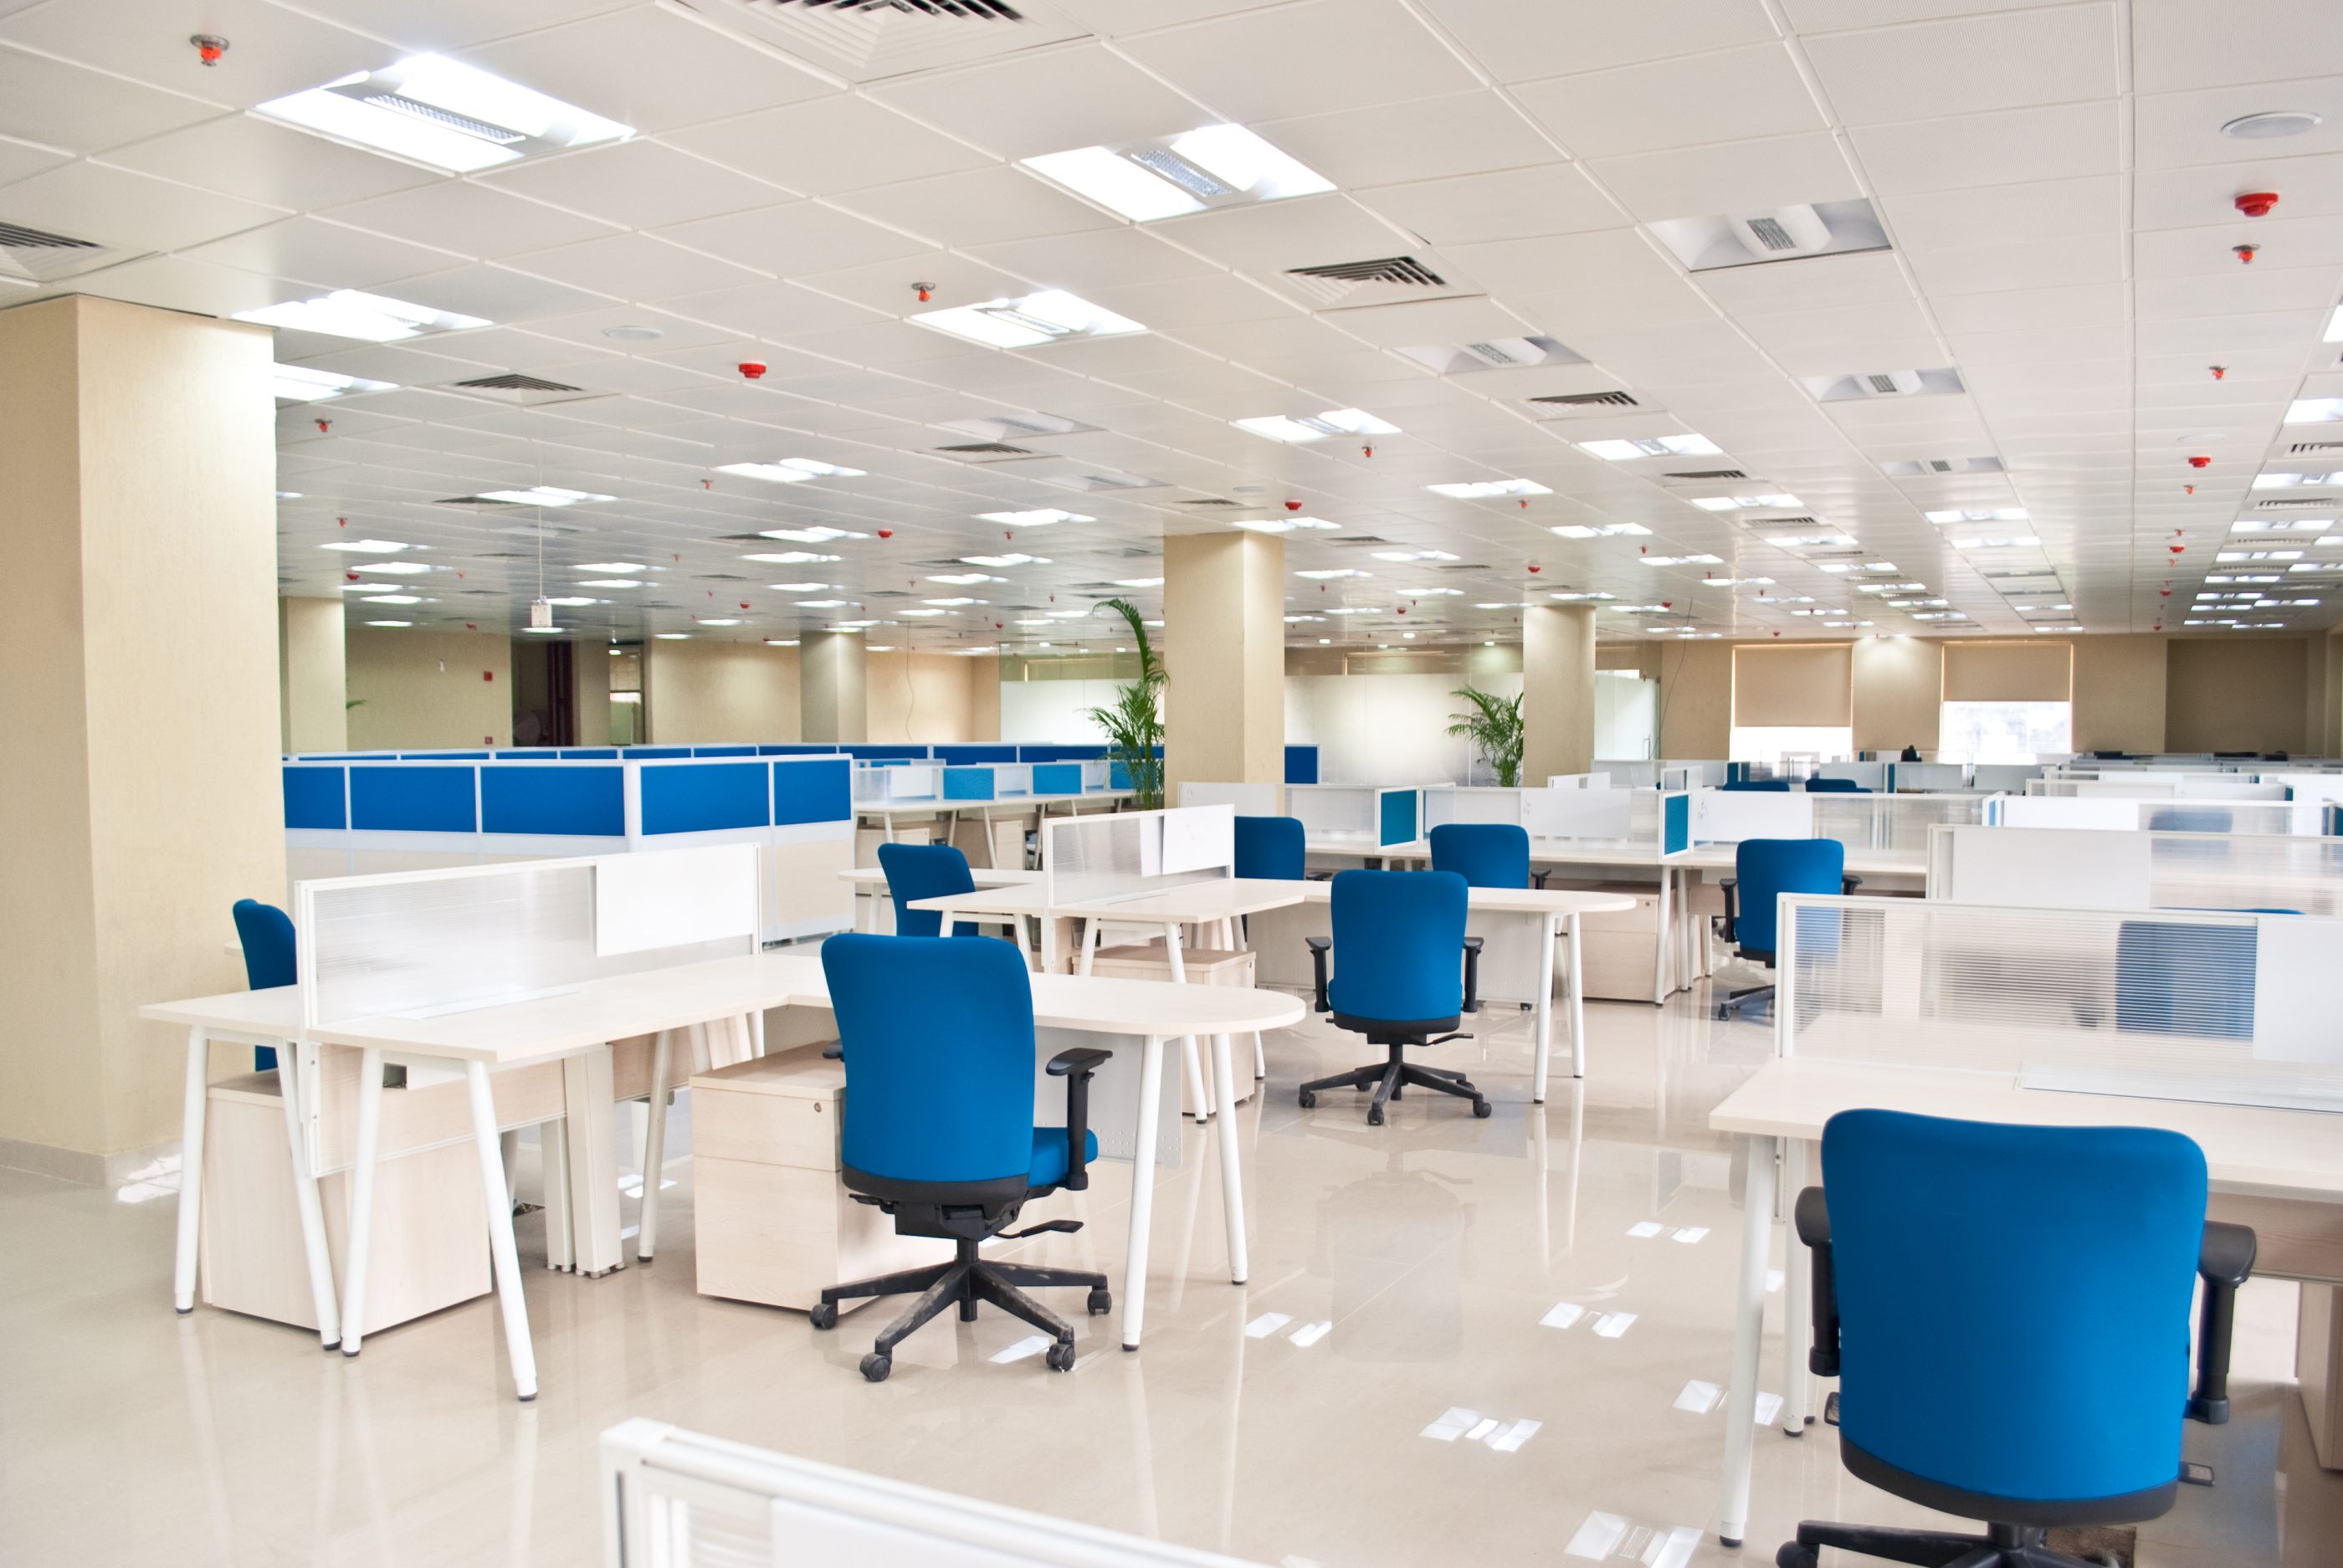 Open office space with white desks and blue chairs